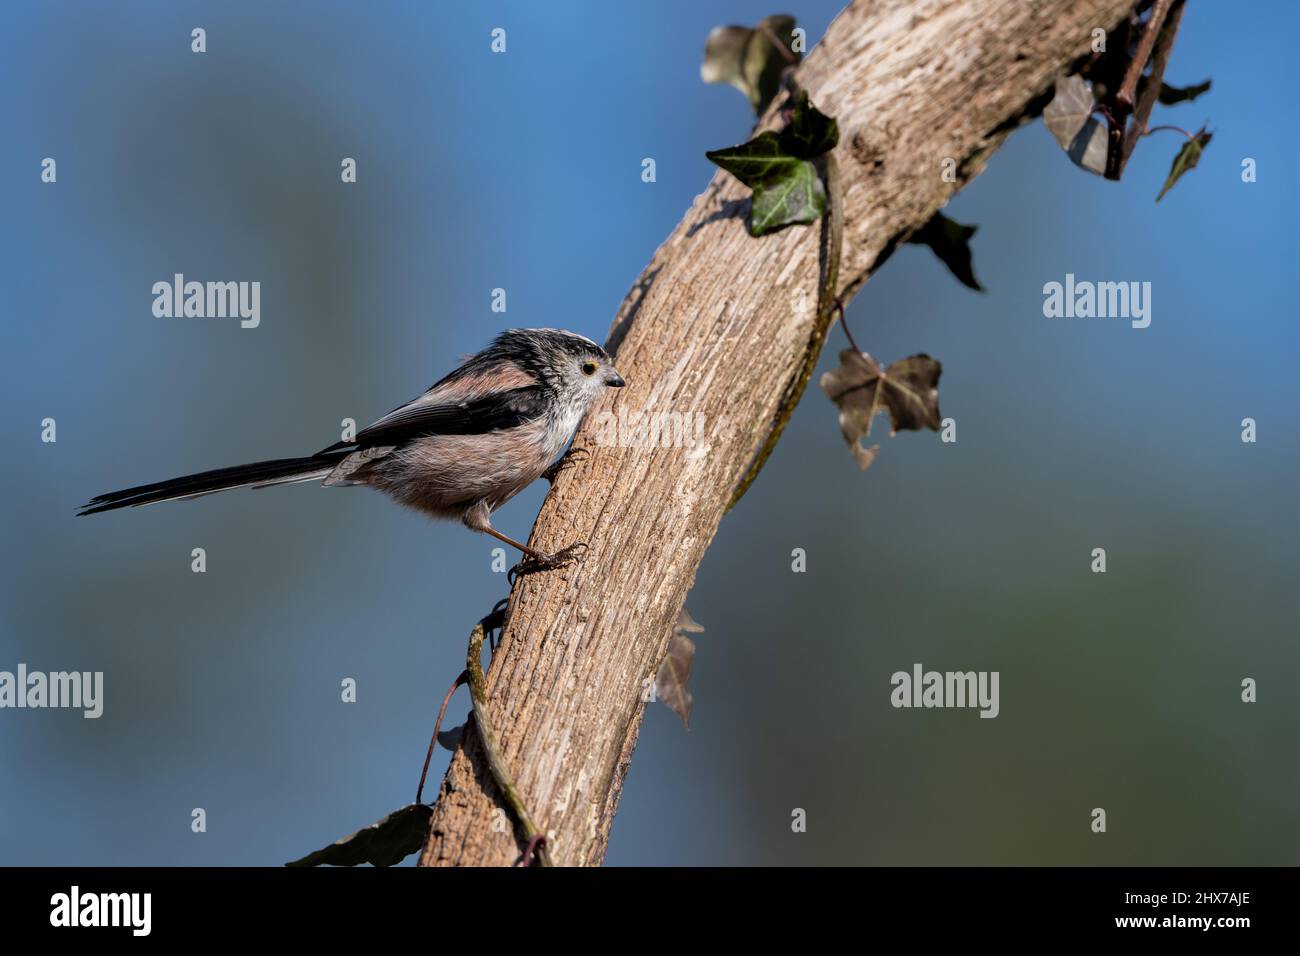 A long-tailed tit sits on the bough of a tree Stock Photo